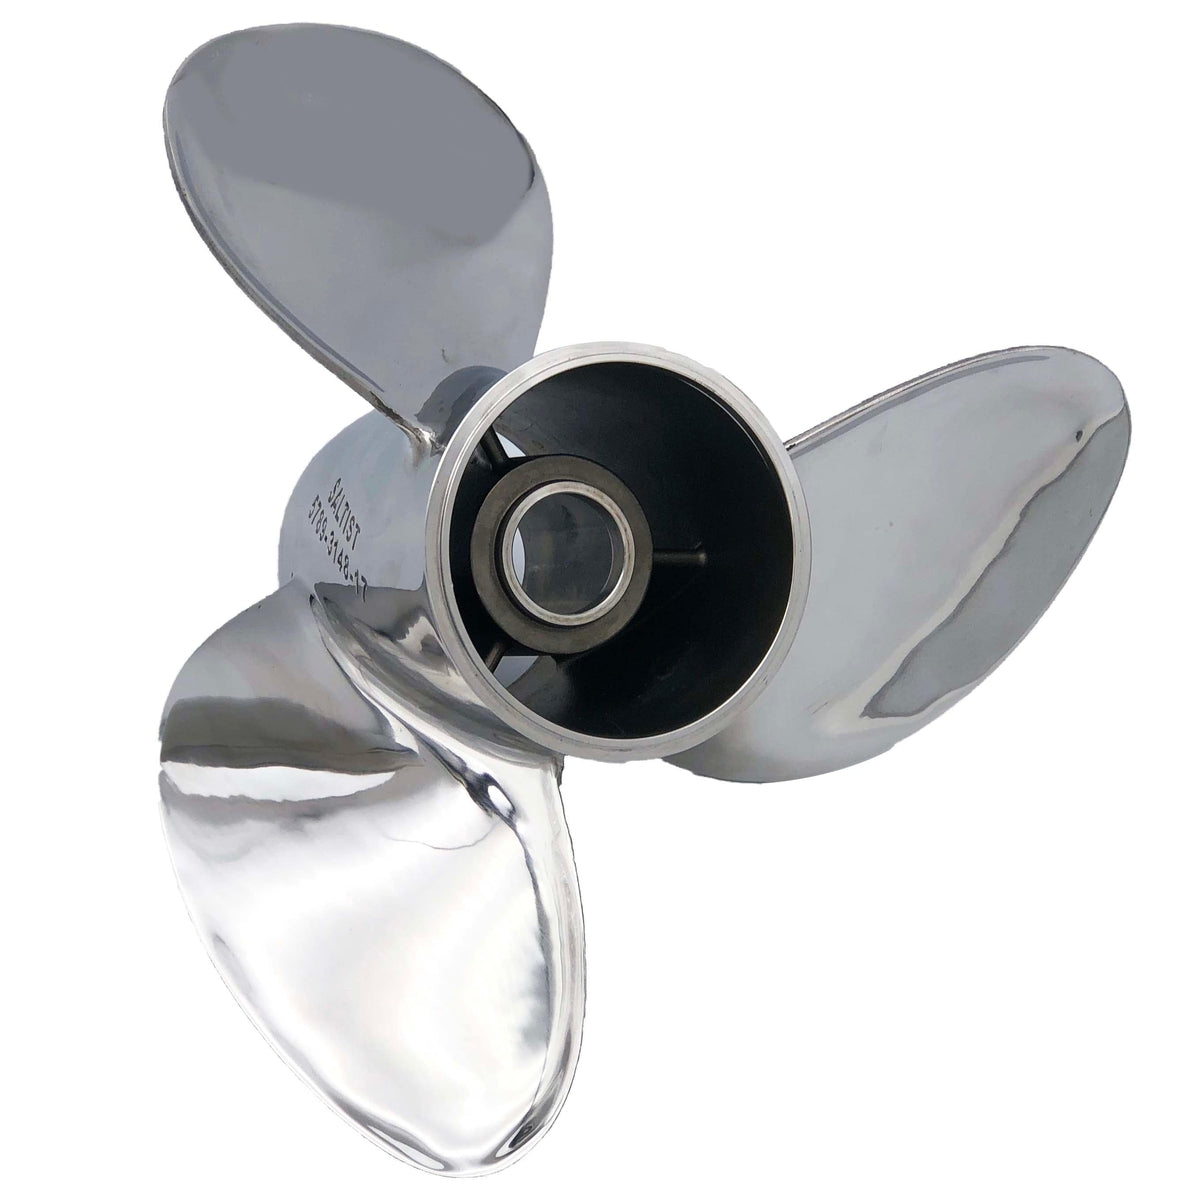 PolaStorm Qualifies for Free Shipping PolaStorm 14-3/4 x 19 Stainless 3-Blade RH Prop #5789-3148-19